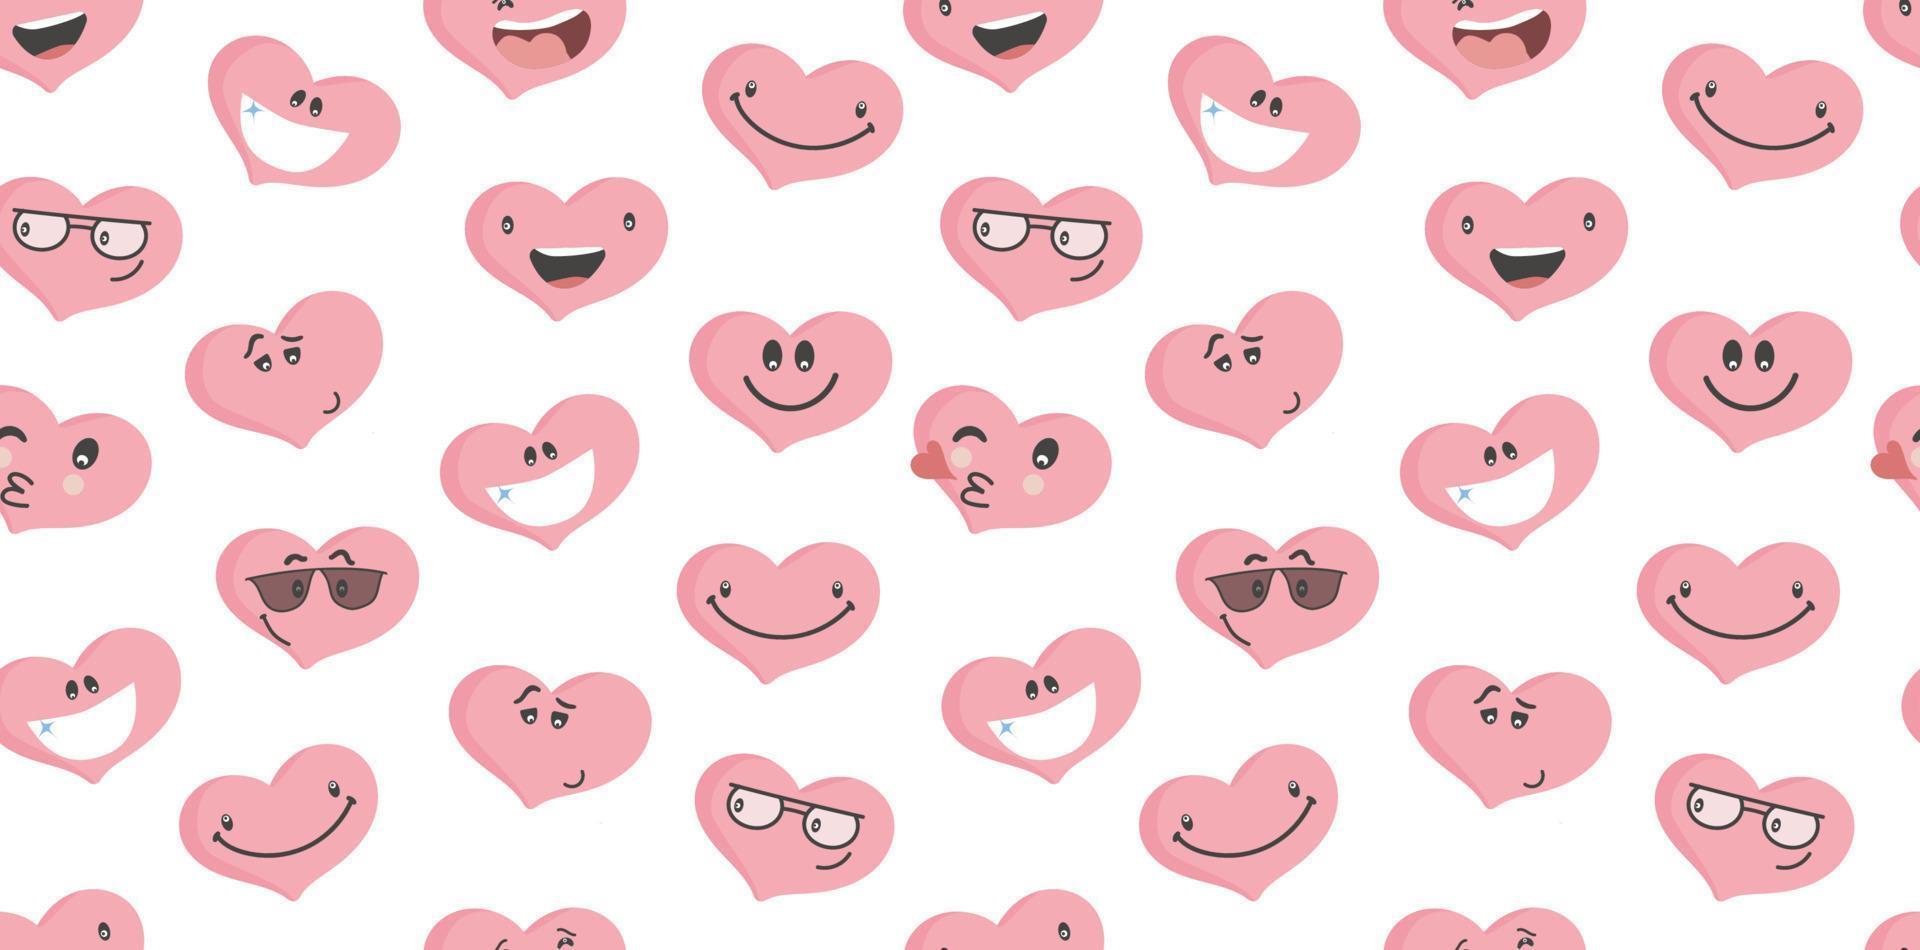 Colorful happy pink heart seamless backround. heart Faces with various Emotions backgrond.  Different colorful hearts. Love symbol. Valentines Day concept vector